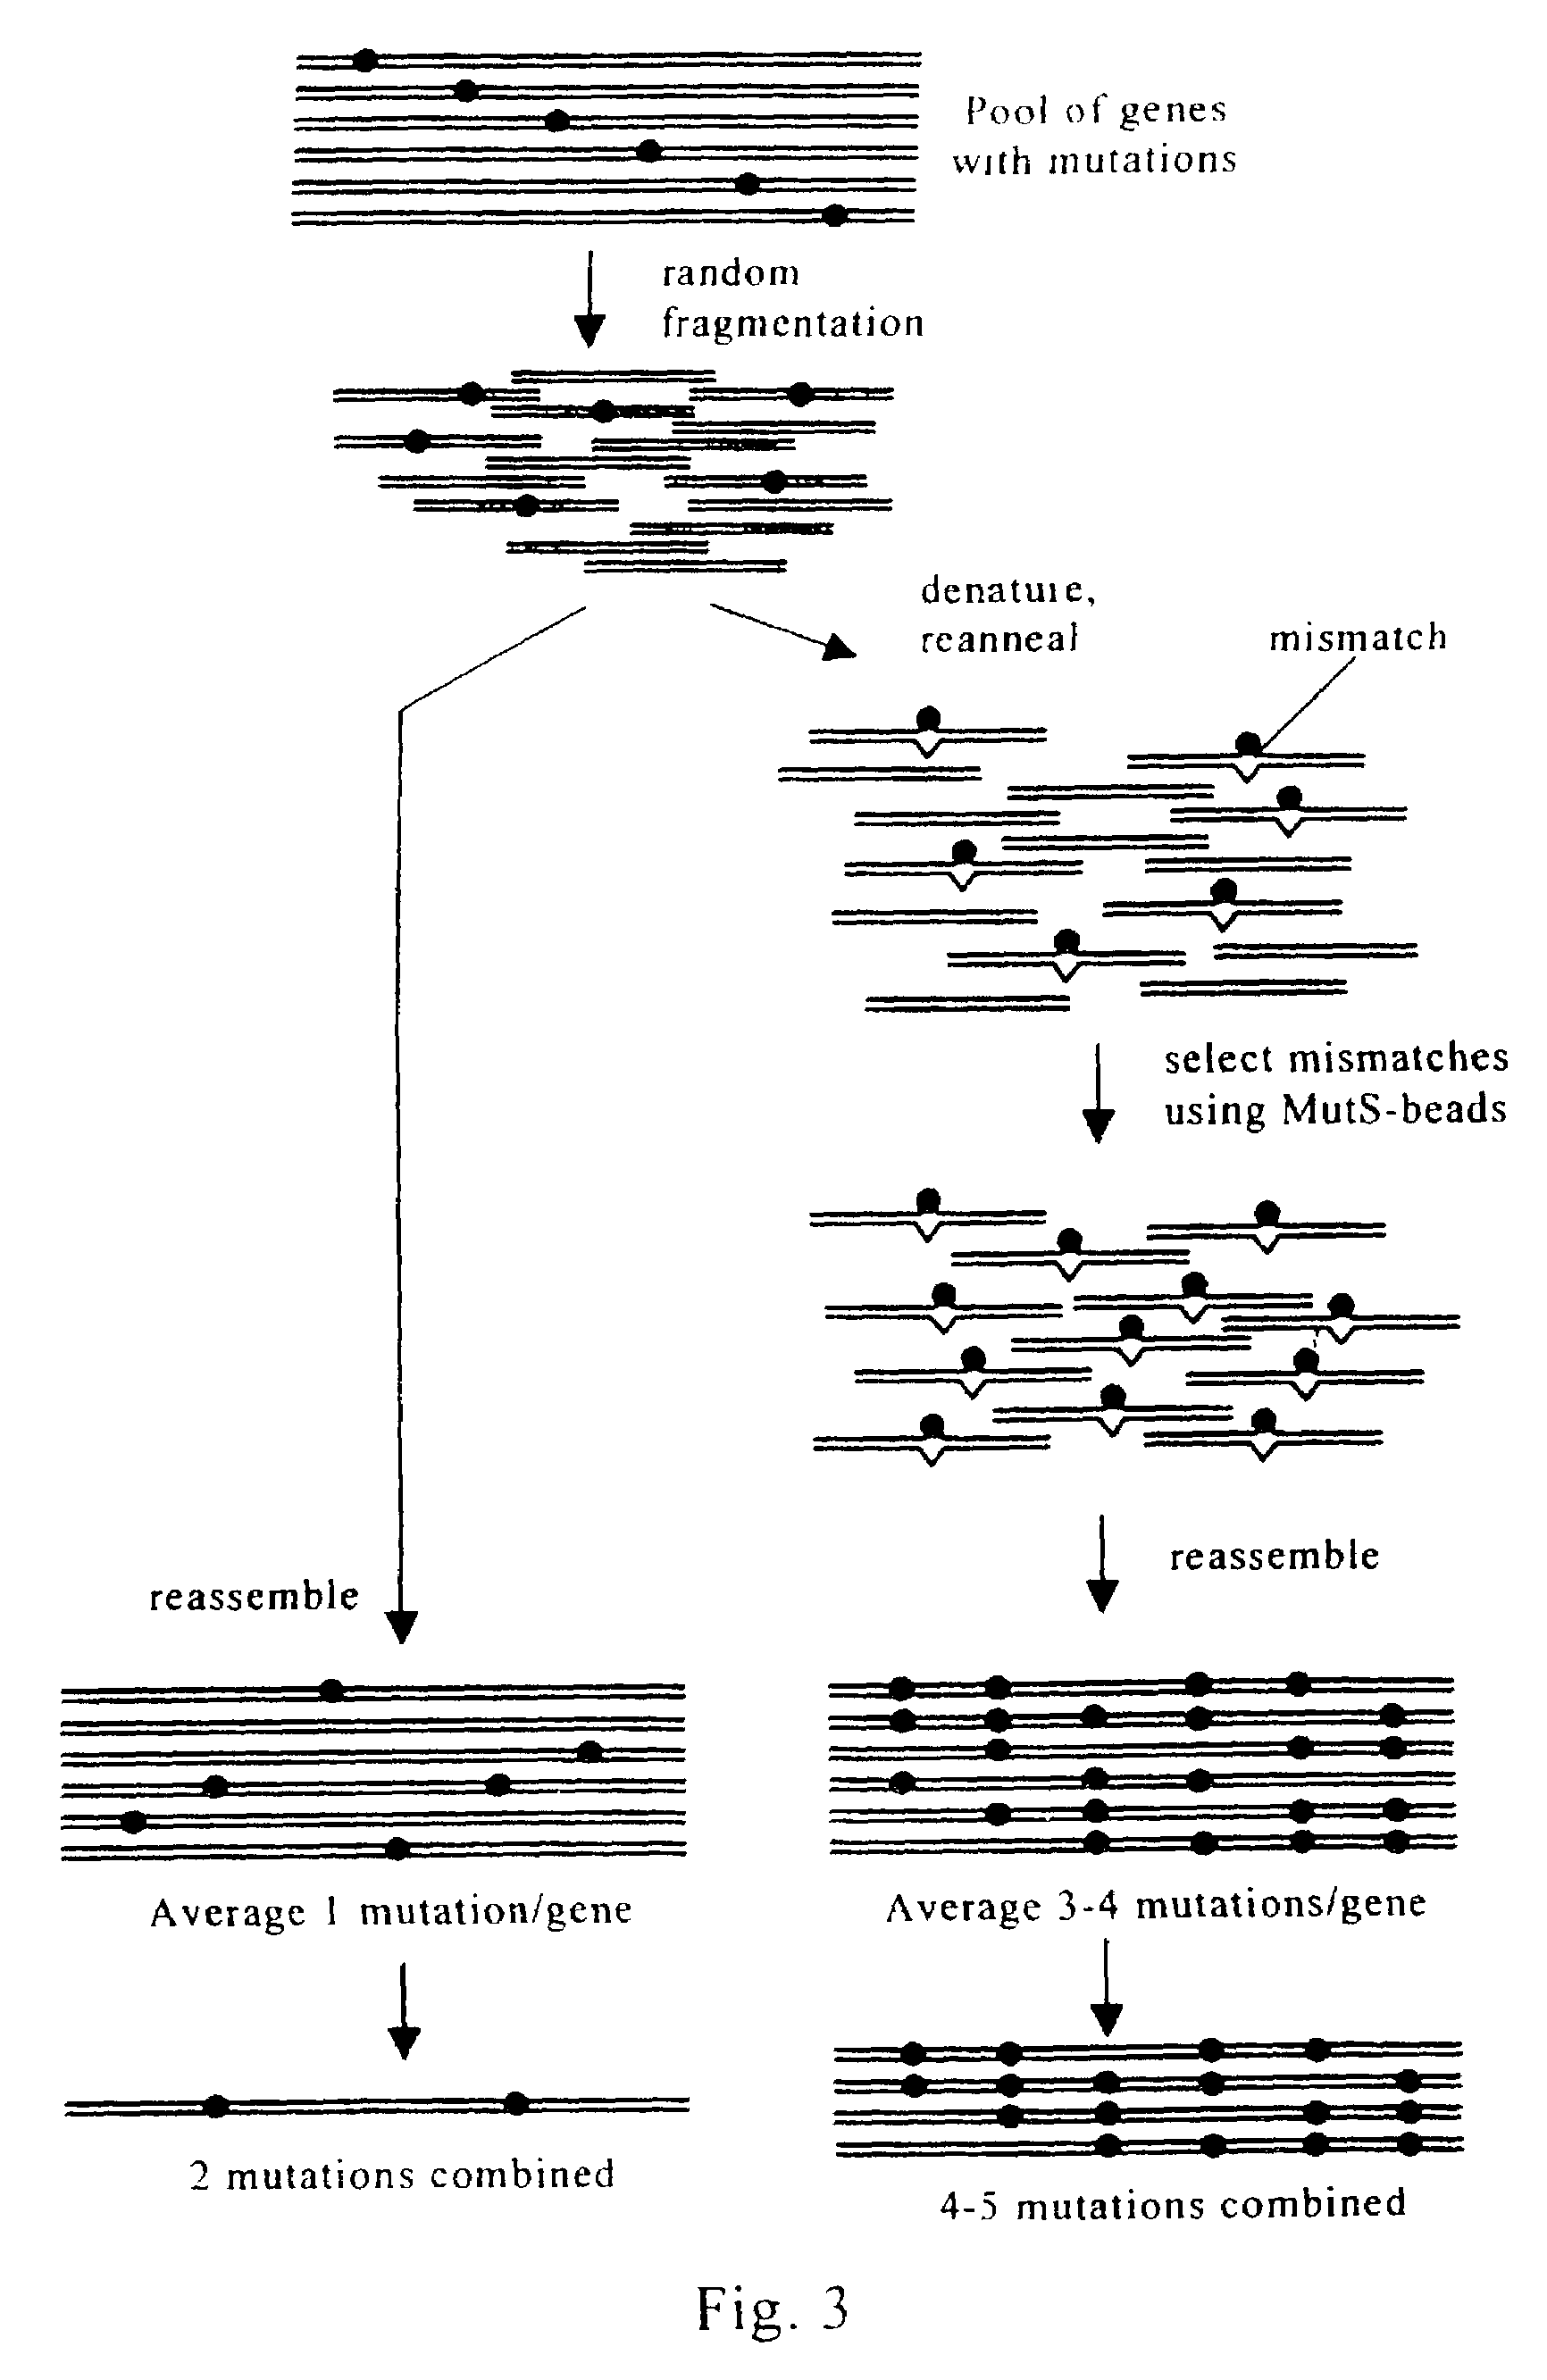 Evolution of whole cells and organisms by recursive sequence recombination